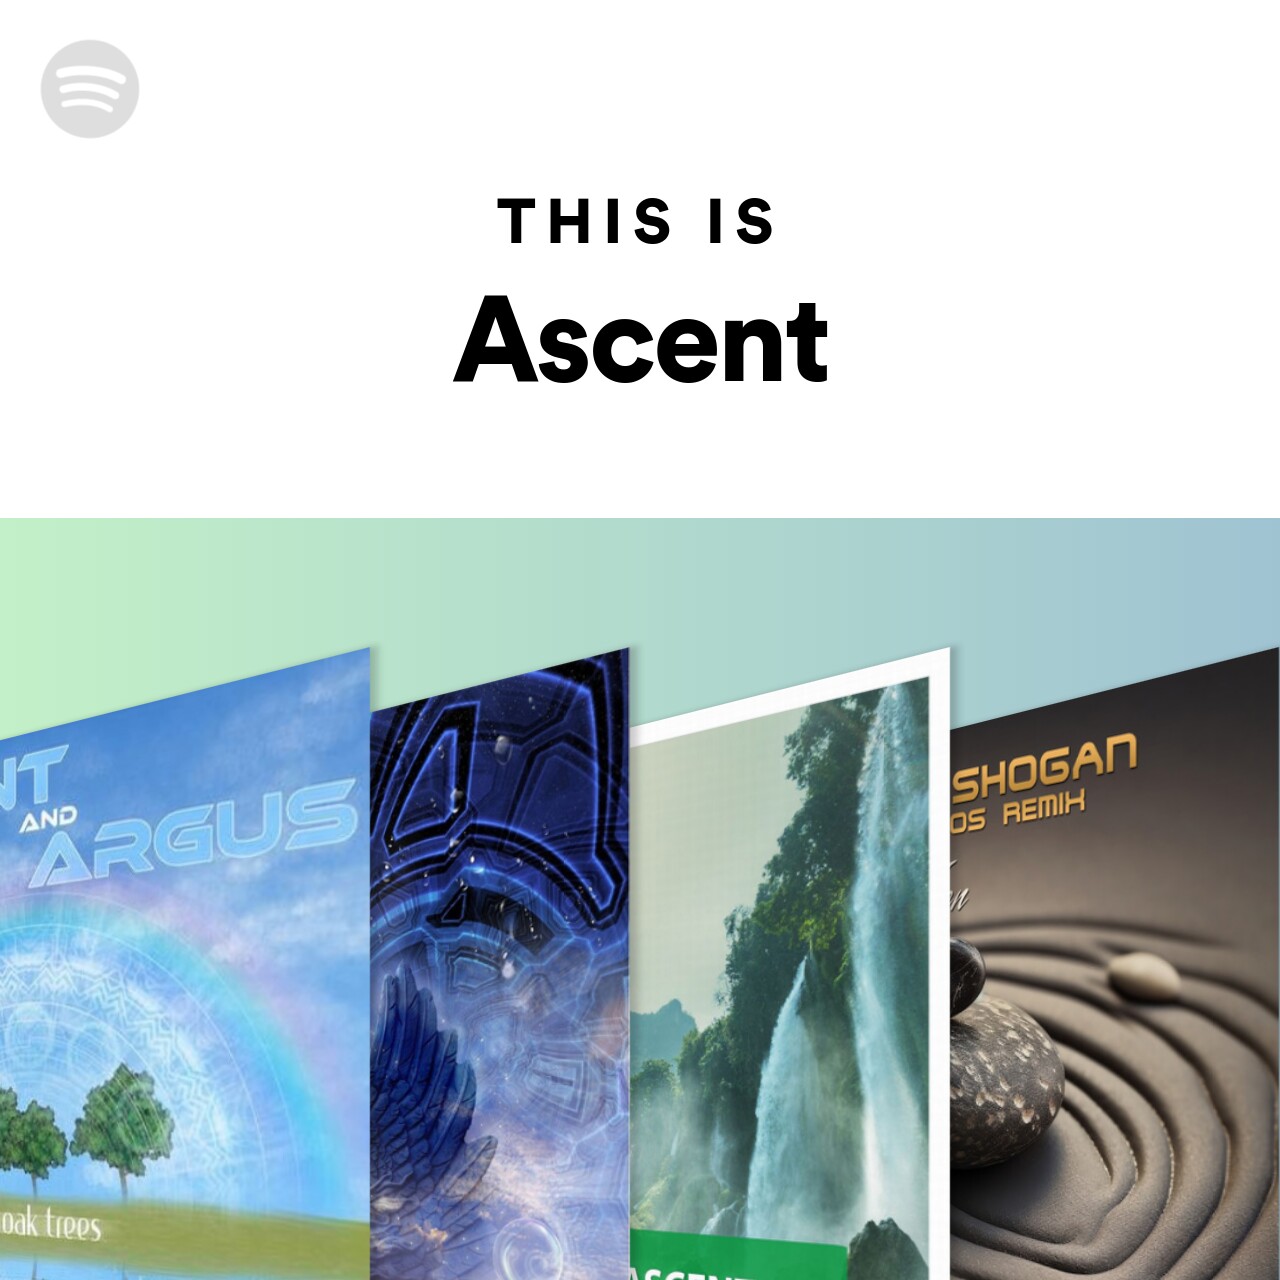 This Is Ascent